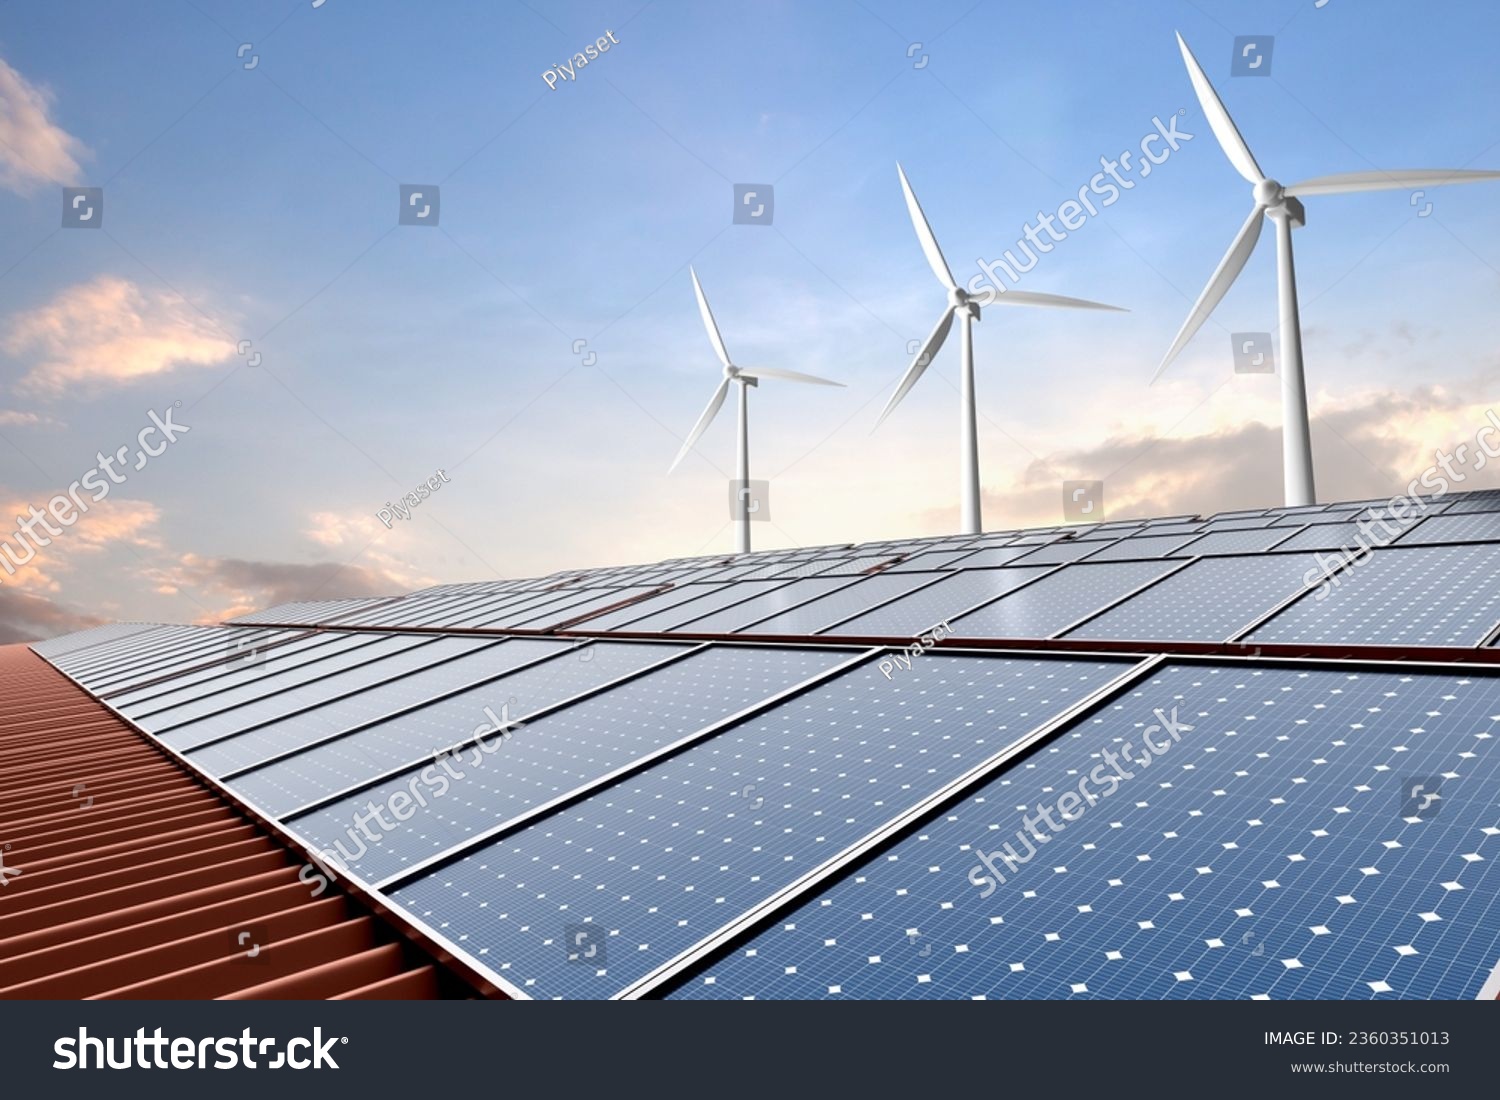 Solar panel on factory roof with wind turbine and blue sky background #2360351013